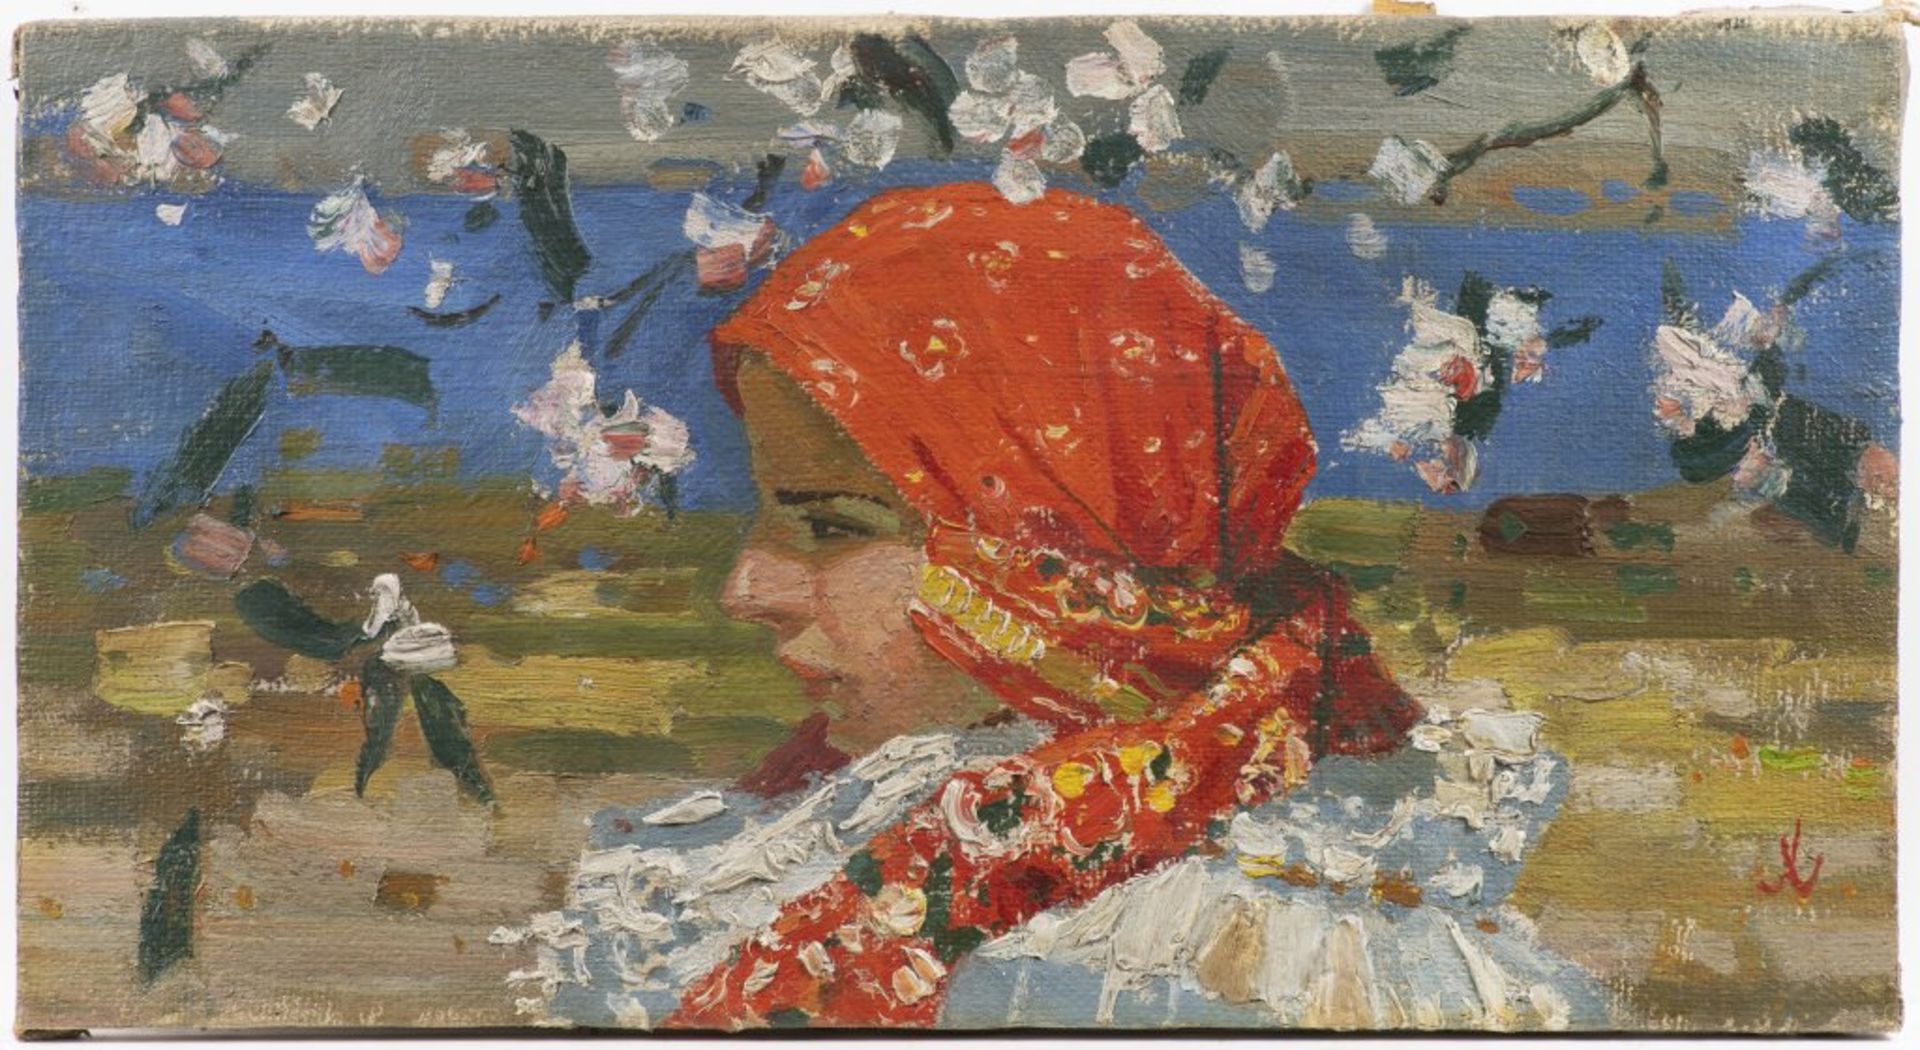 JOŽA ÚPRKA 1861 - 1940: YOUNG WOMAN WITH BLOSSOMS Ca. 1910 Oil on canvas 32 x 59 cm Signed lower